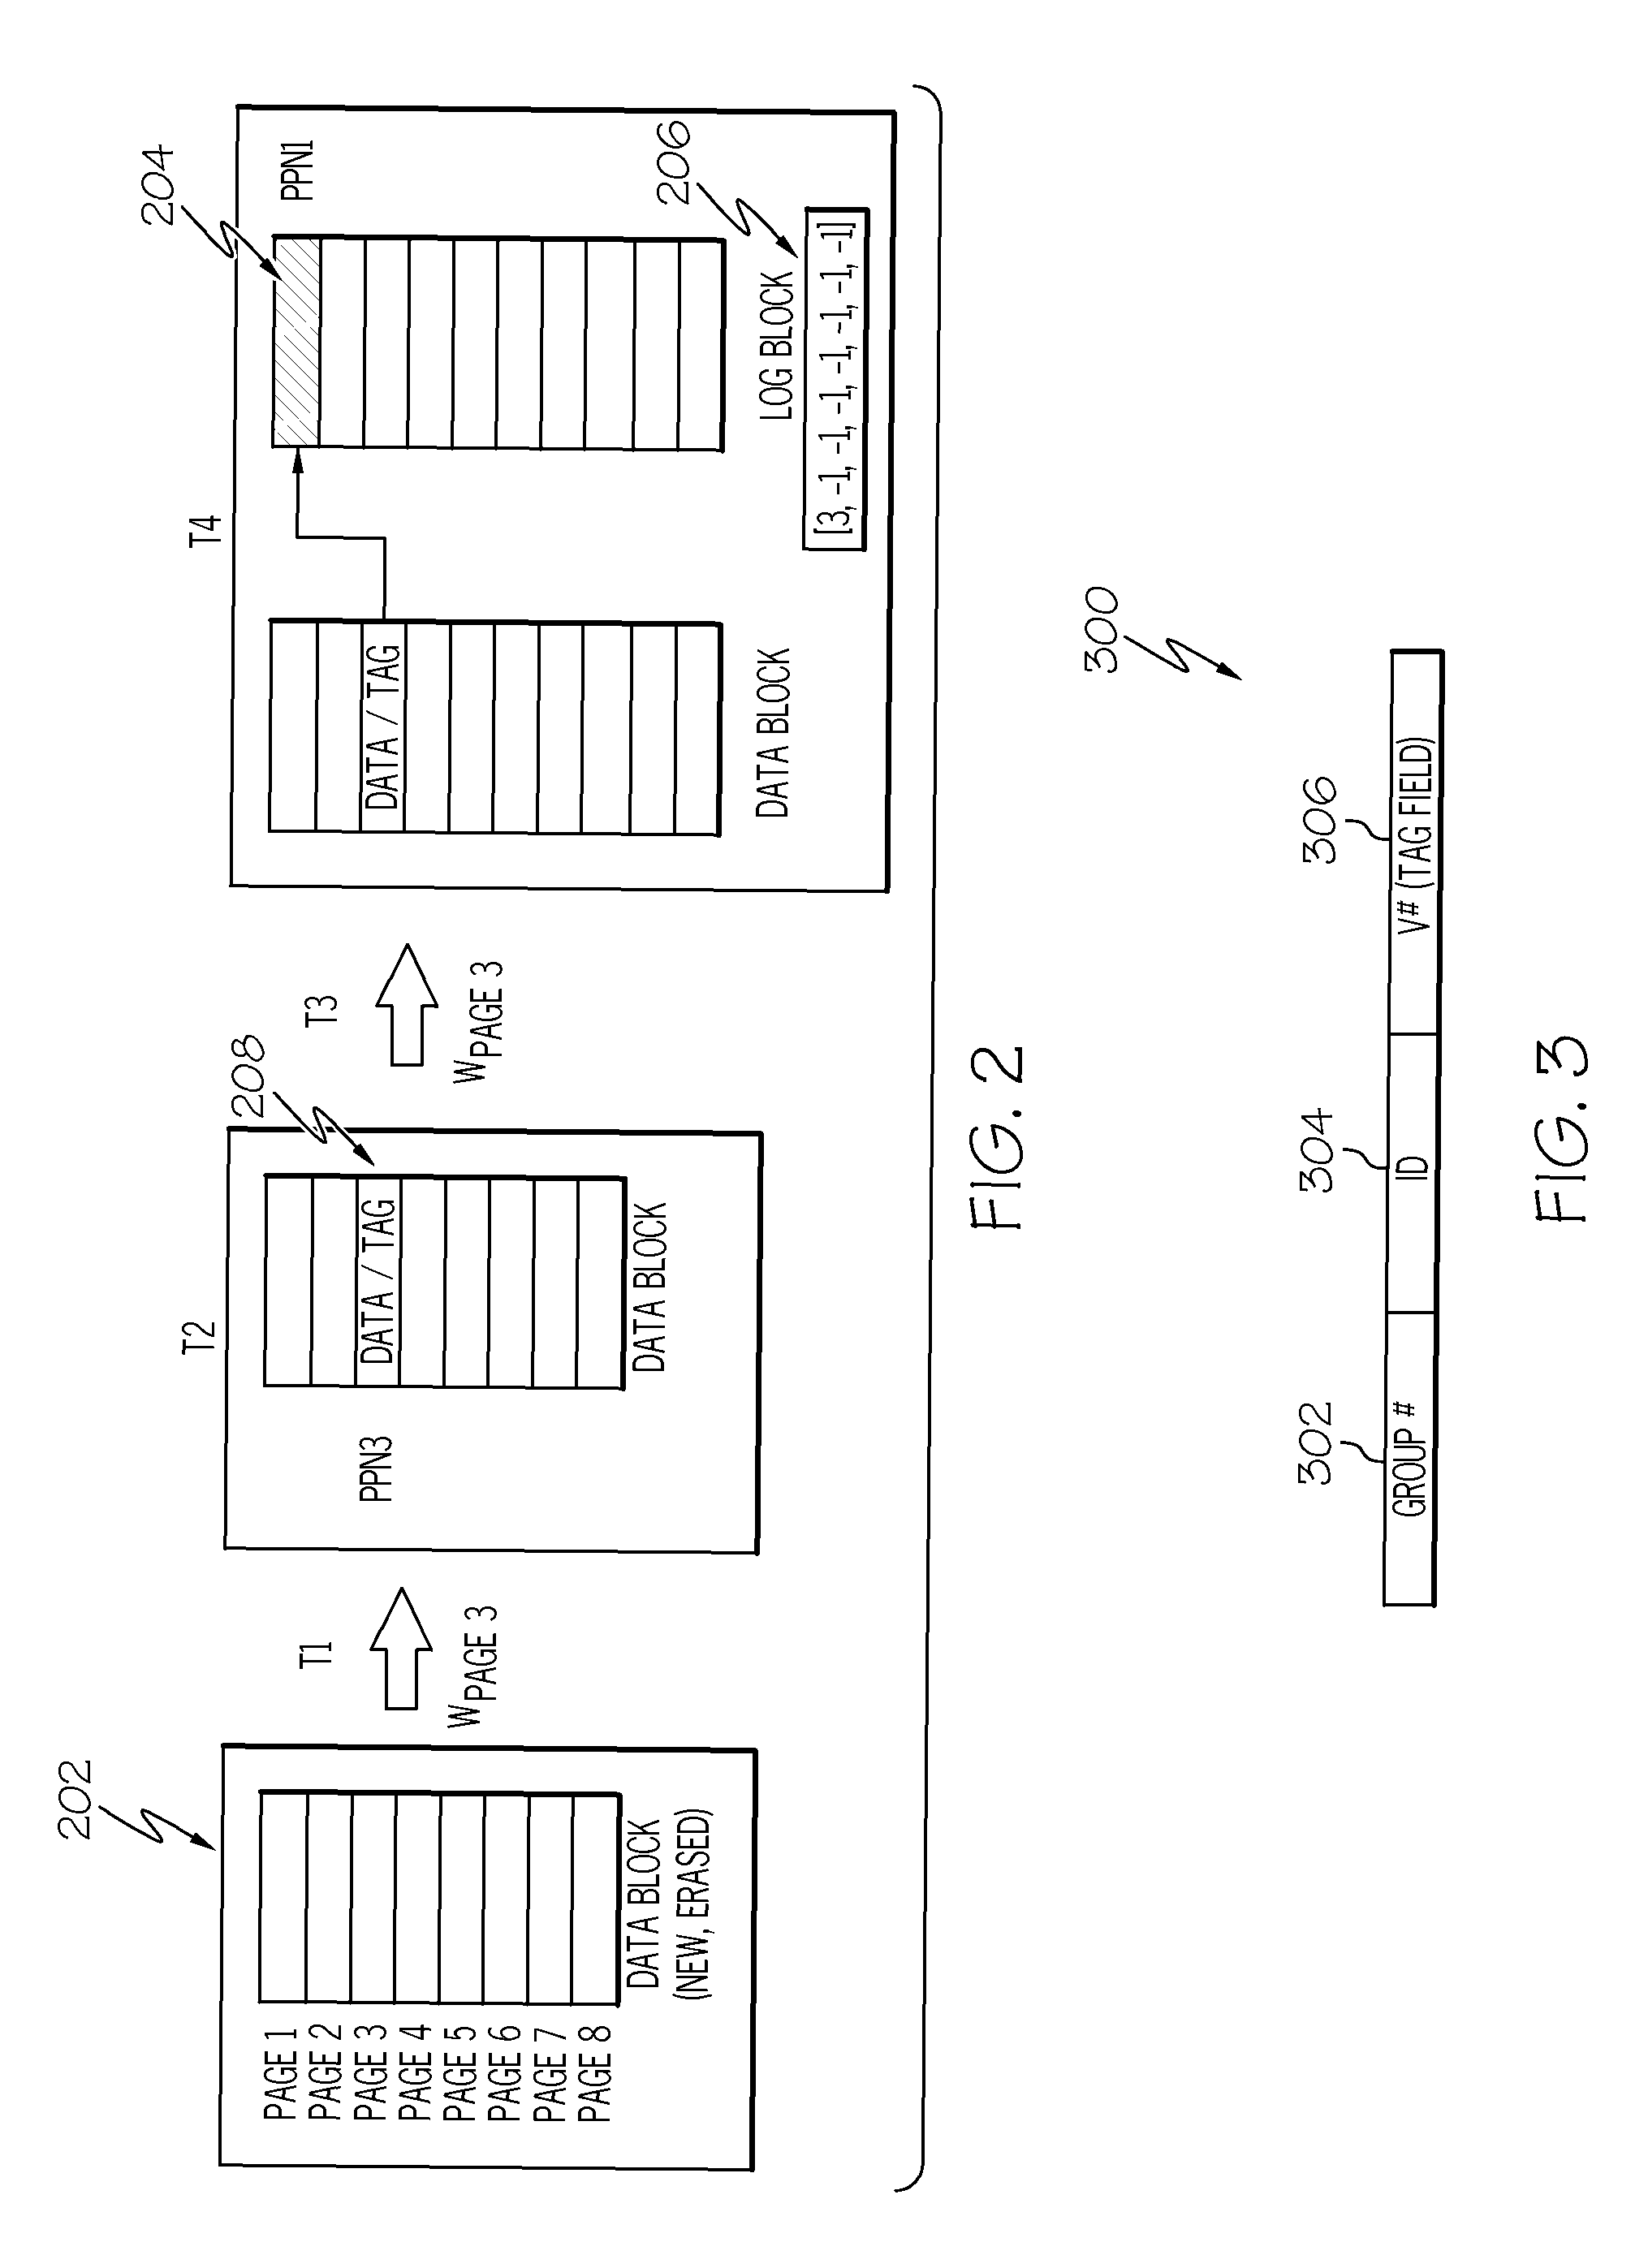 Maintaining versions of data in solid state memory